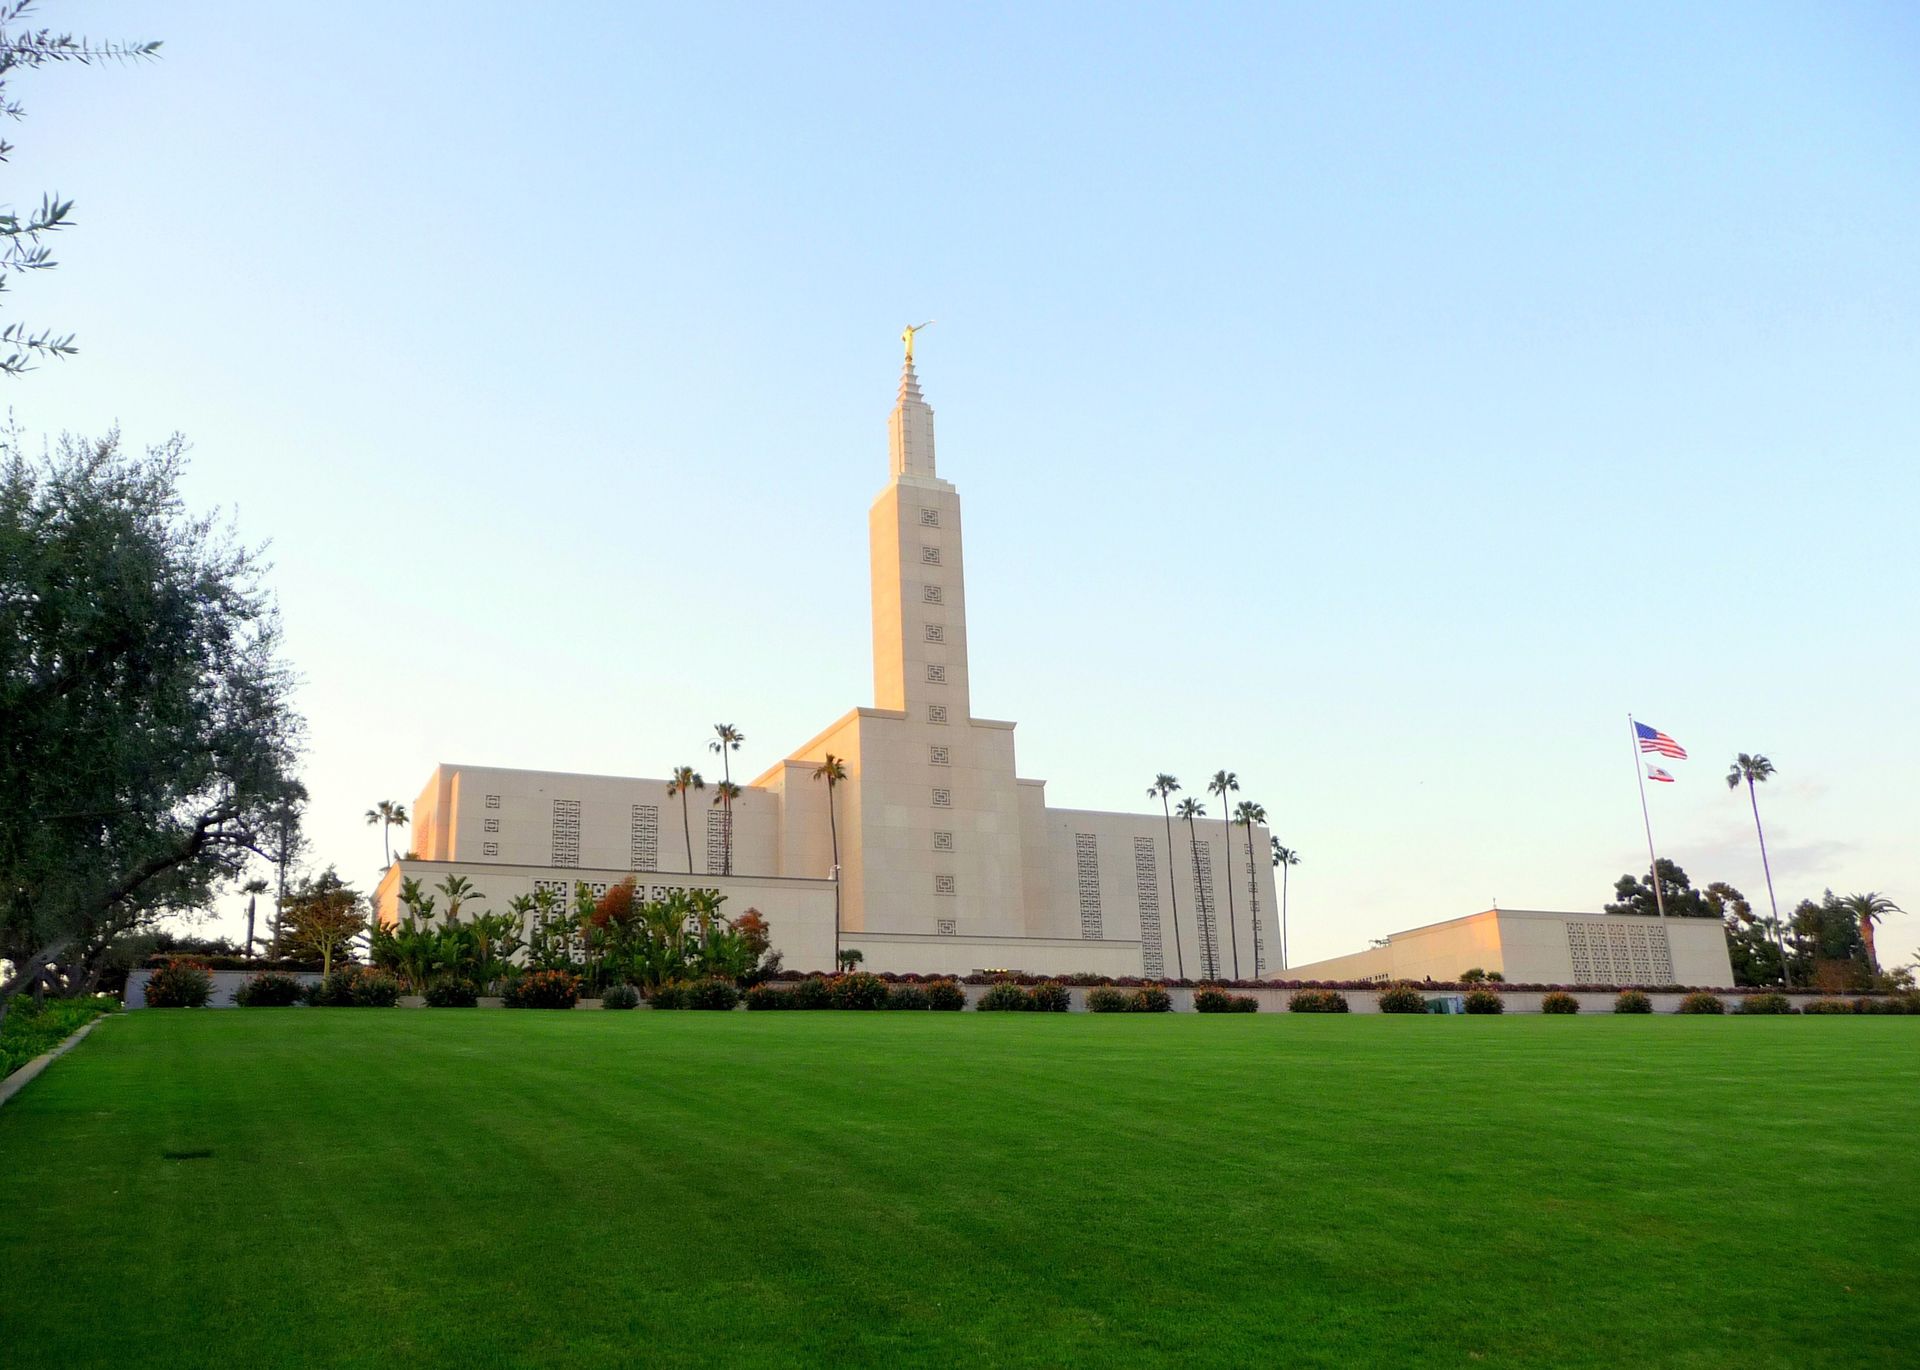 The Los Angeles California Temple and grounds on a clear day.